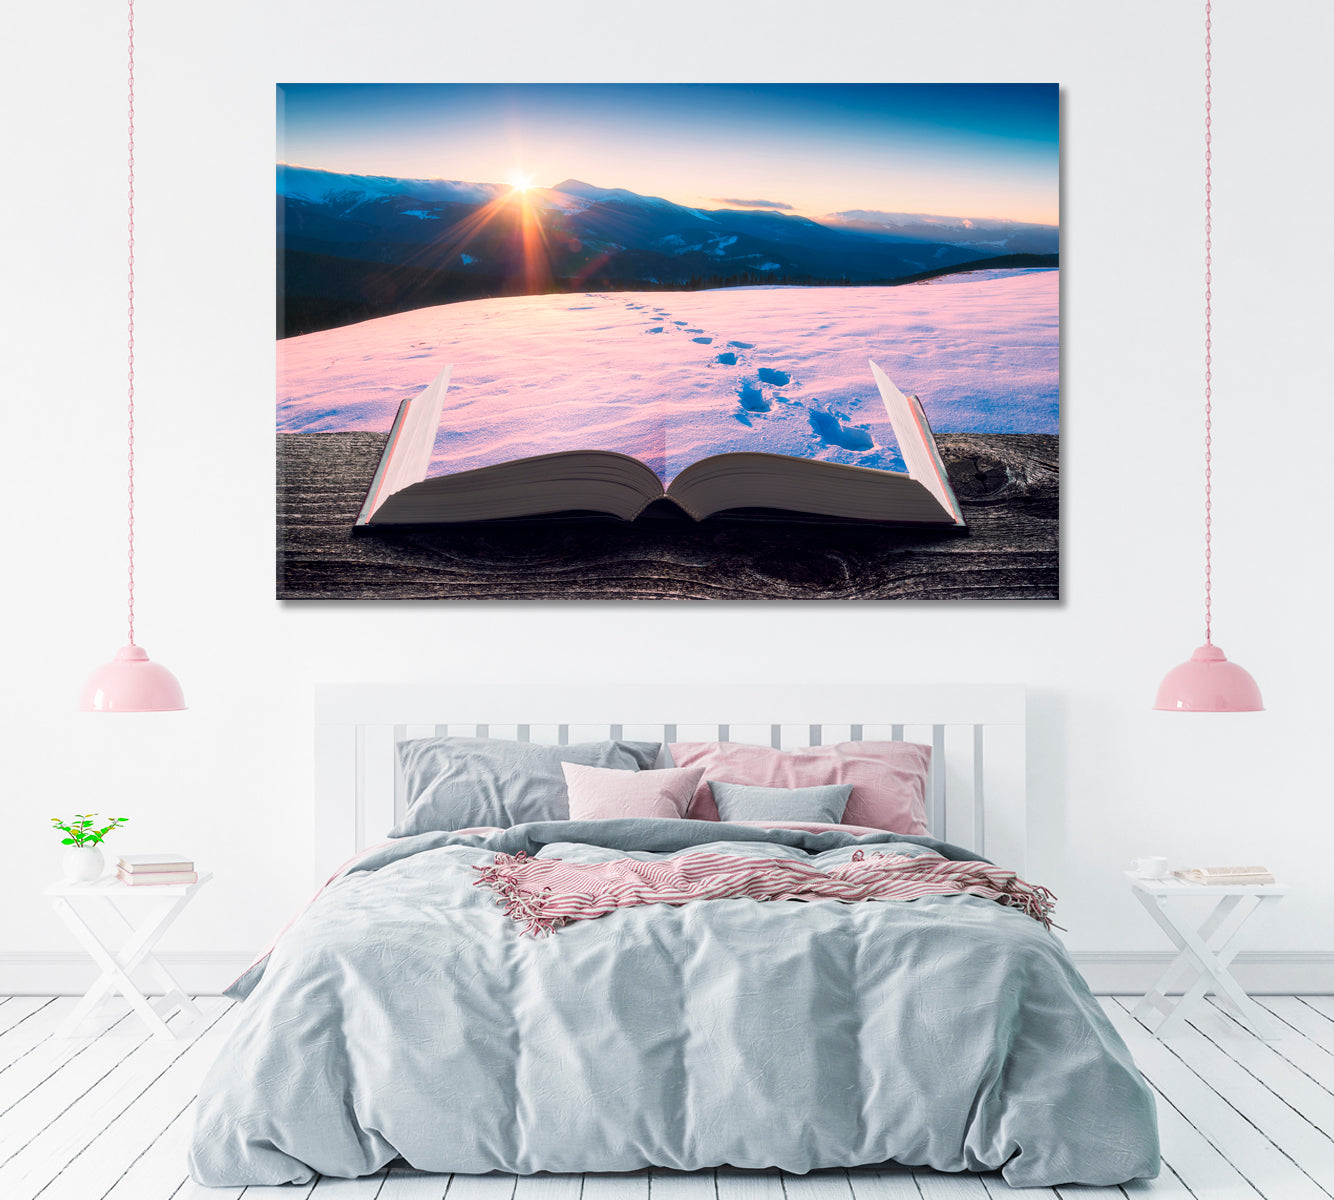 Mountain Valley Covered with Snow on Pages of Magical Book Canvas Print ArtLexy 1 Panel 24"x16" inches 